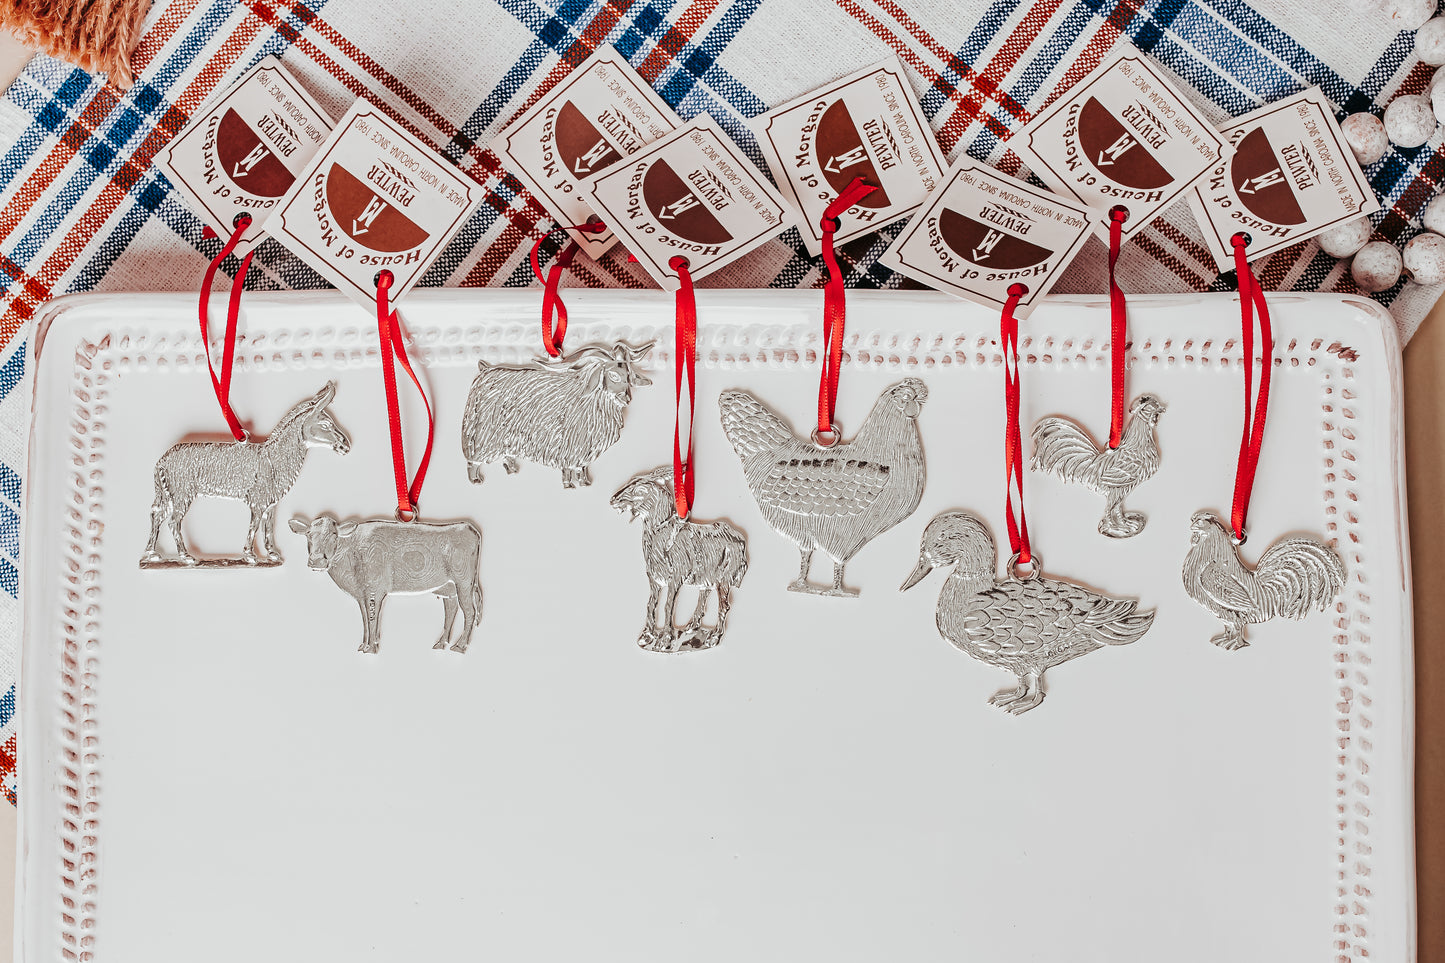 Farm Animal Gifts - Cow - Chicken - Horse - Goat - Sheep- Donkey - Ram - Rooster - Tractor - Individual Ornaments or Gift Set